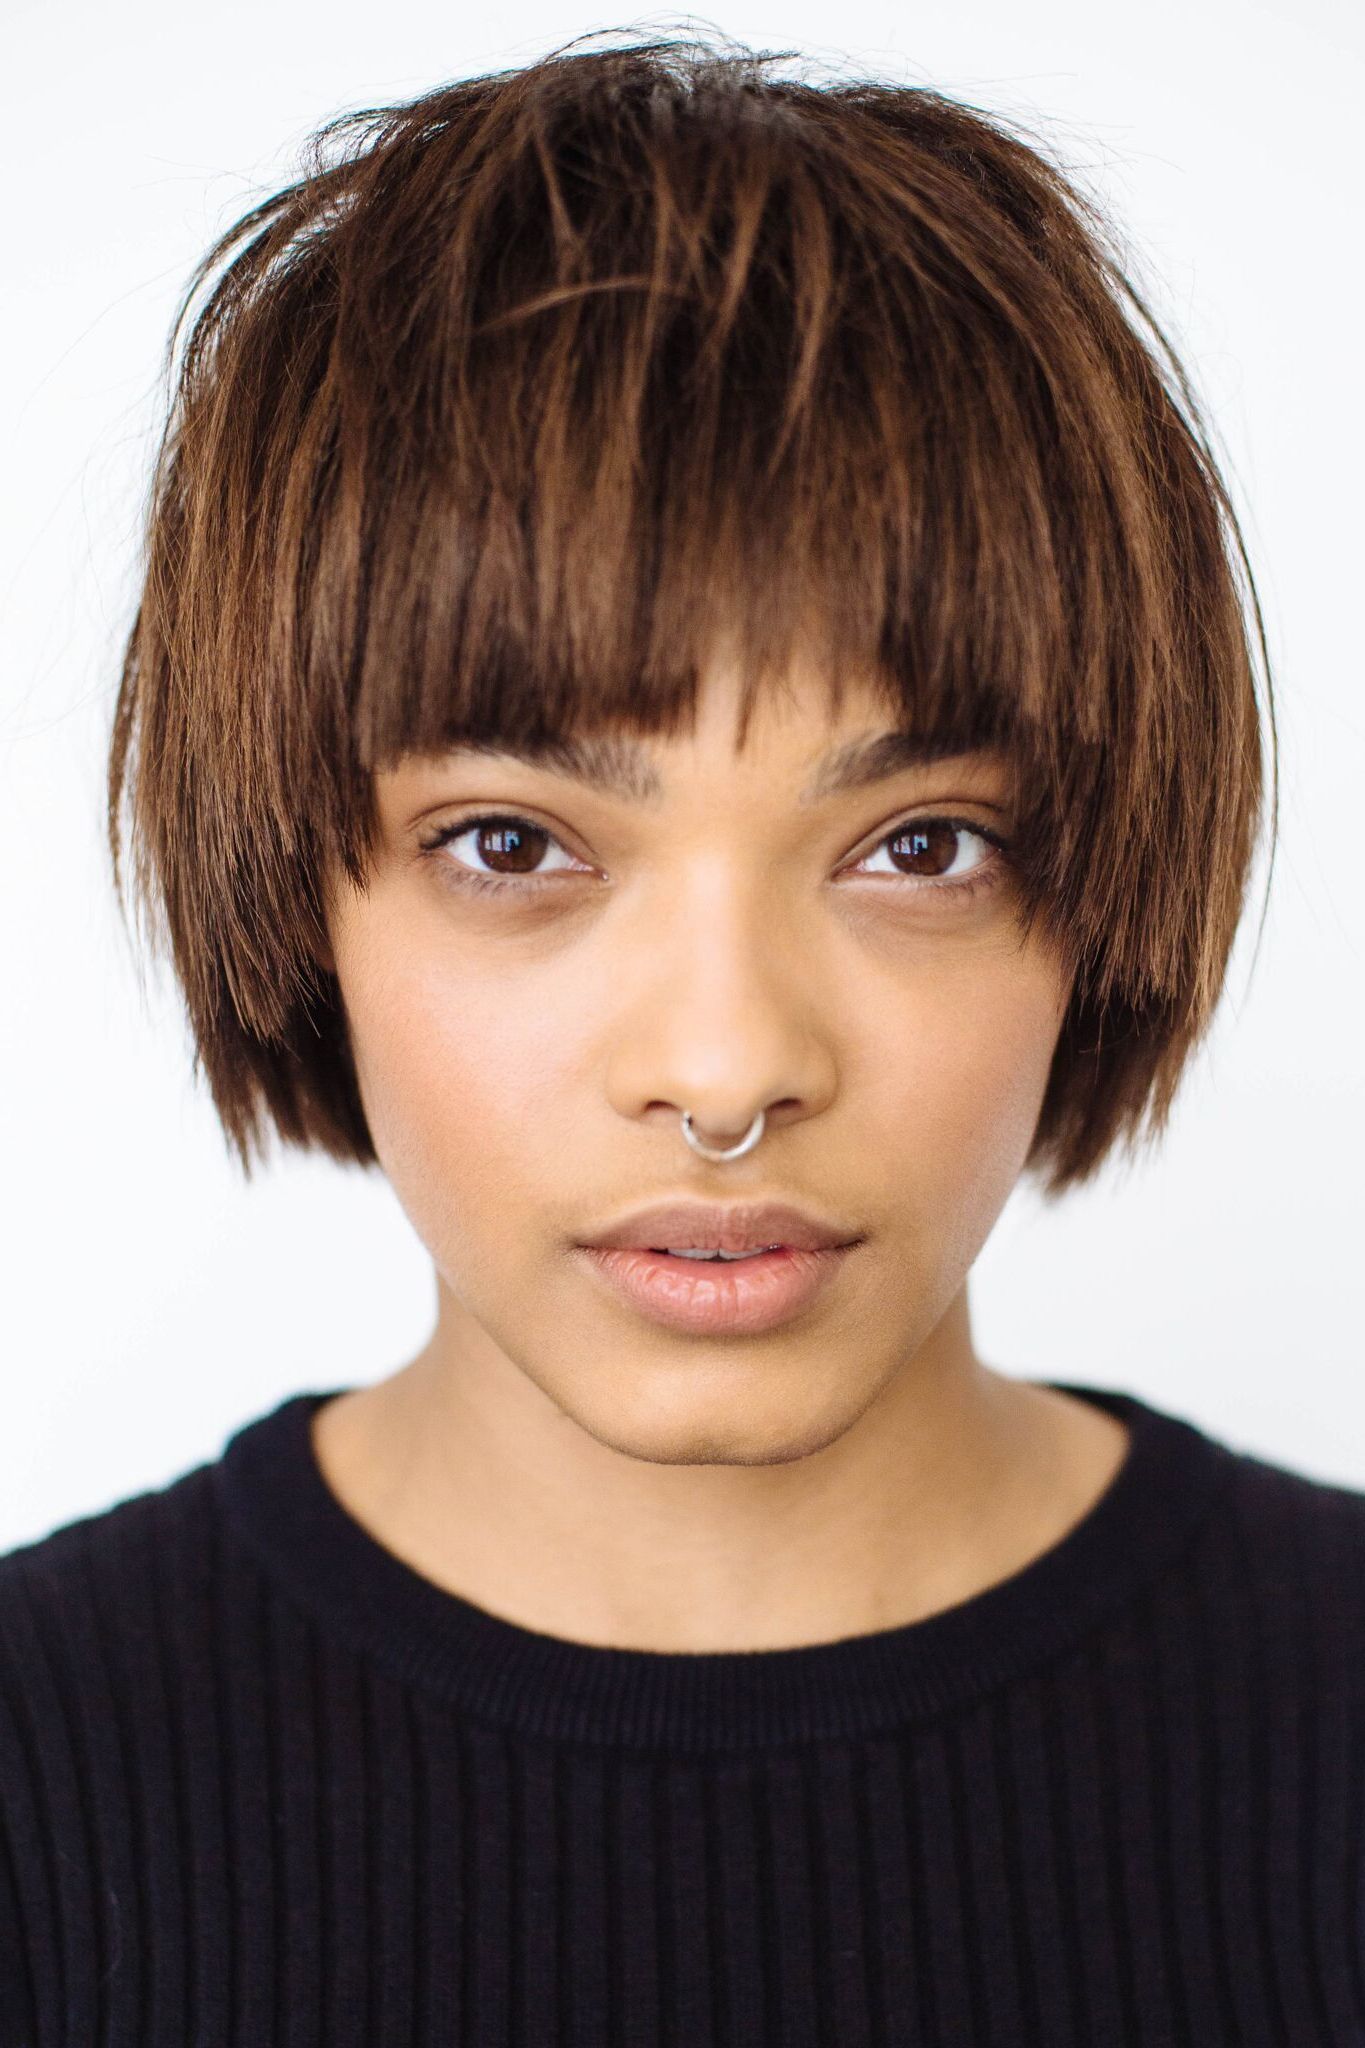 Hair Ideas Trends 2018 – Accessories Shag Blunt Bangs Throughout Elongated Choppy Pixie Haircuts With Tapered Back (View 20 of 20)